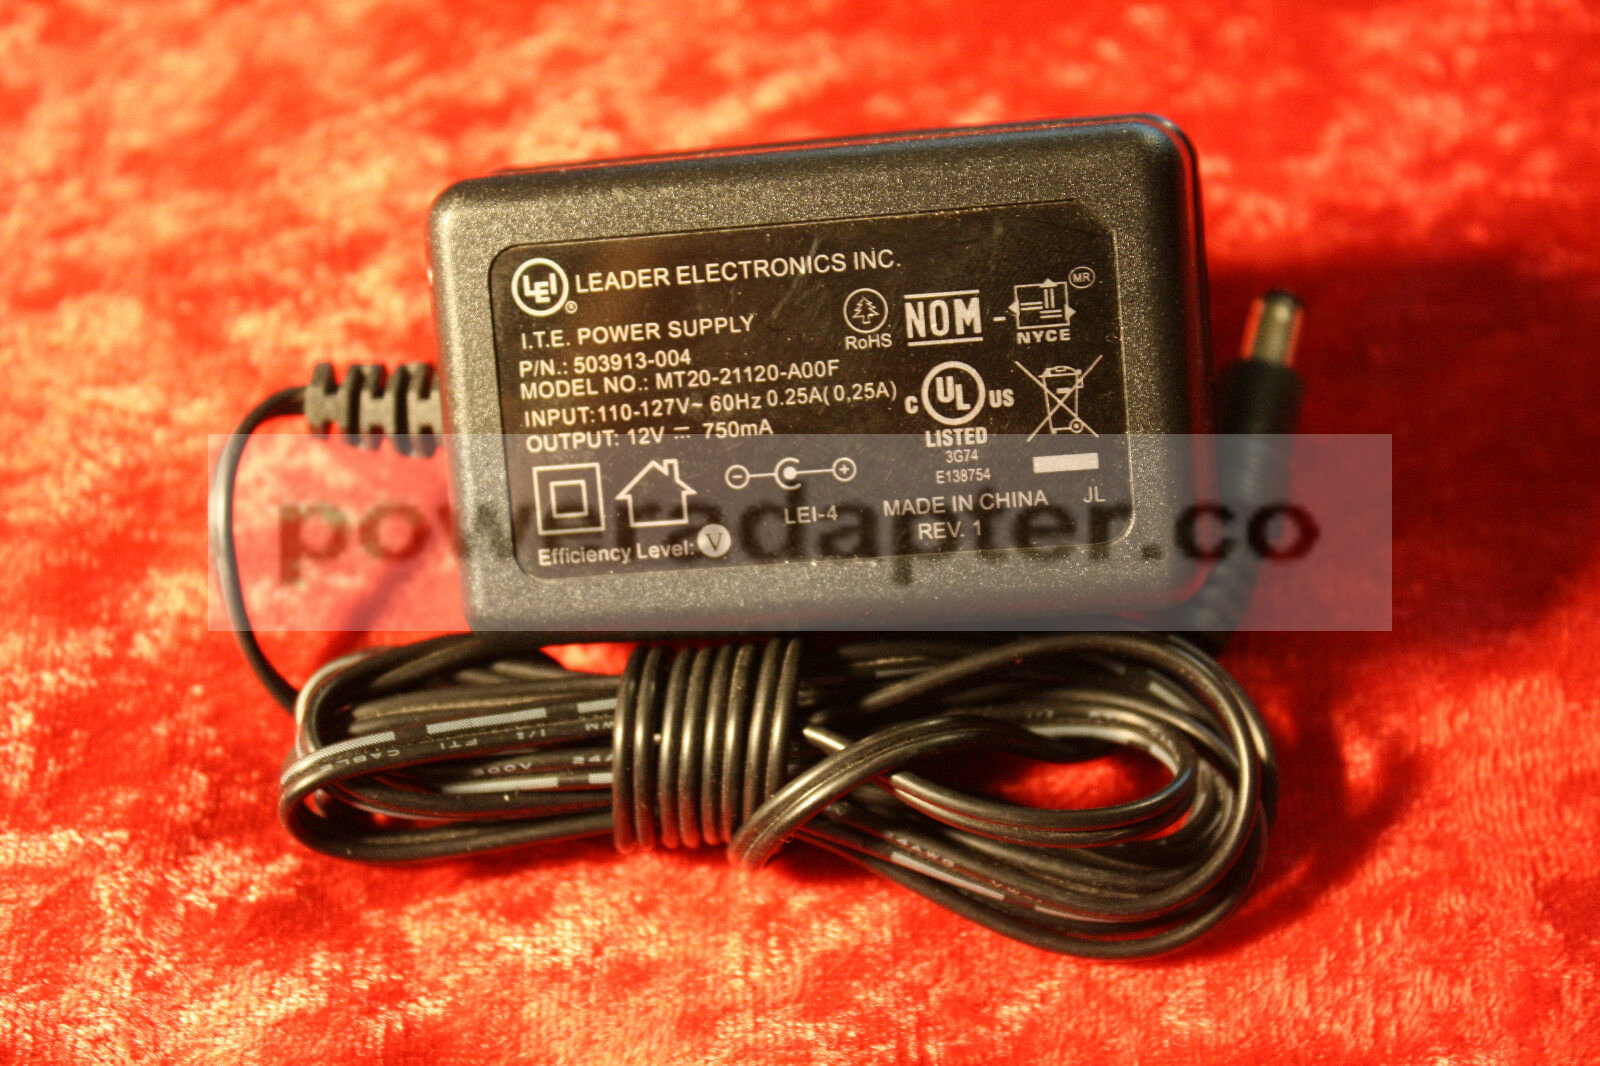 LEI Leader 503913-004 12V 750mA AC to DC Power Supply Adapter MT20-21120-A00F Condition: new Type: AC to DC Wall Cha - Click Image to Close